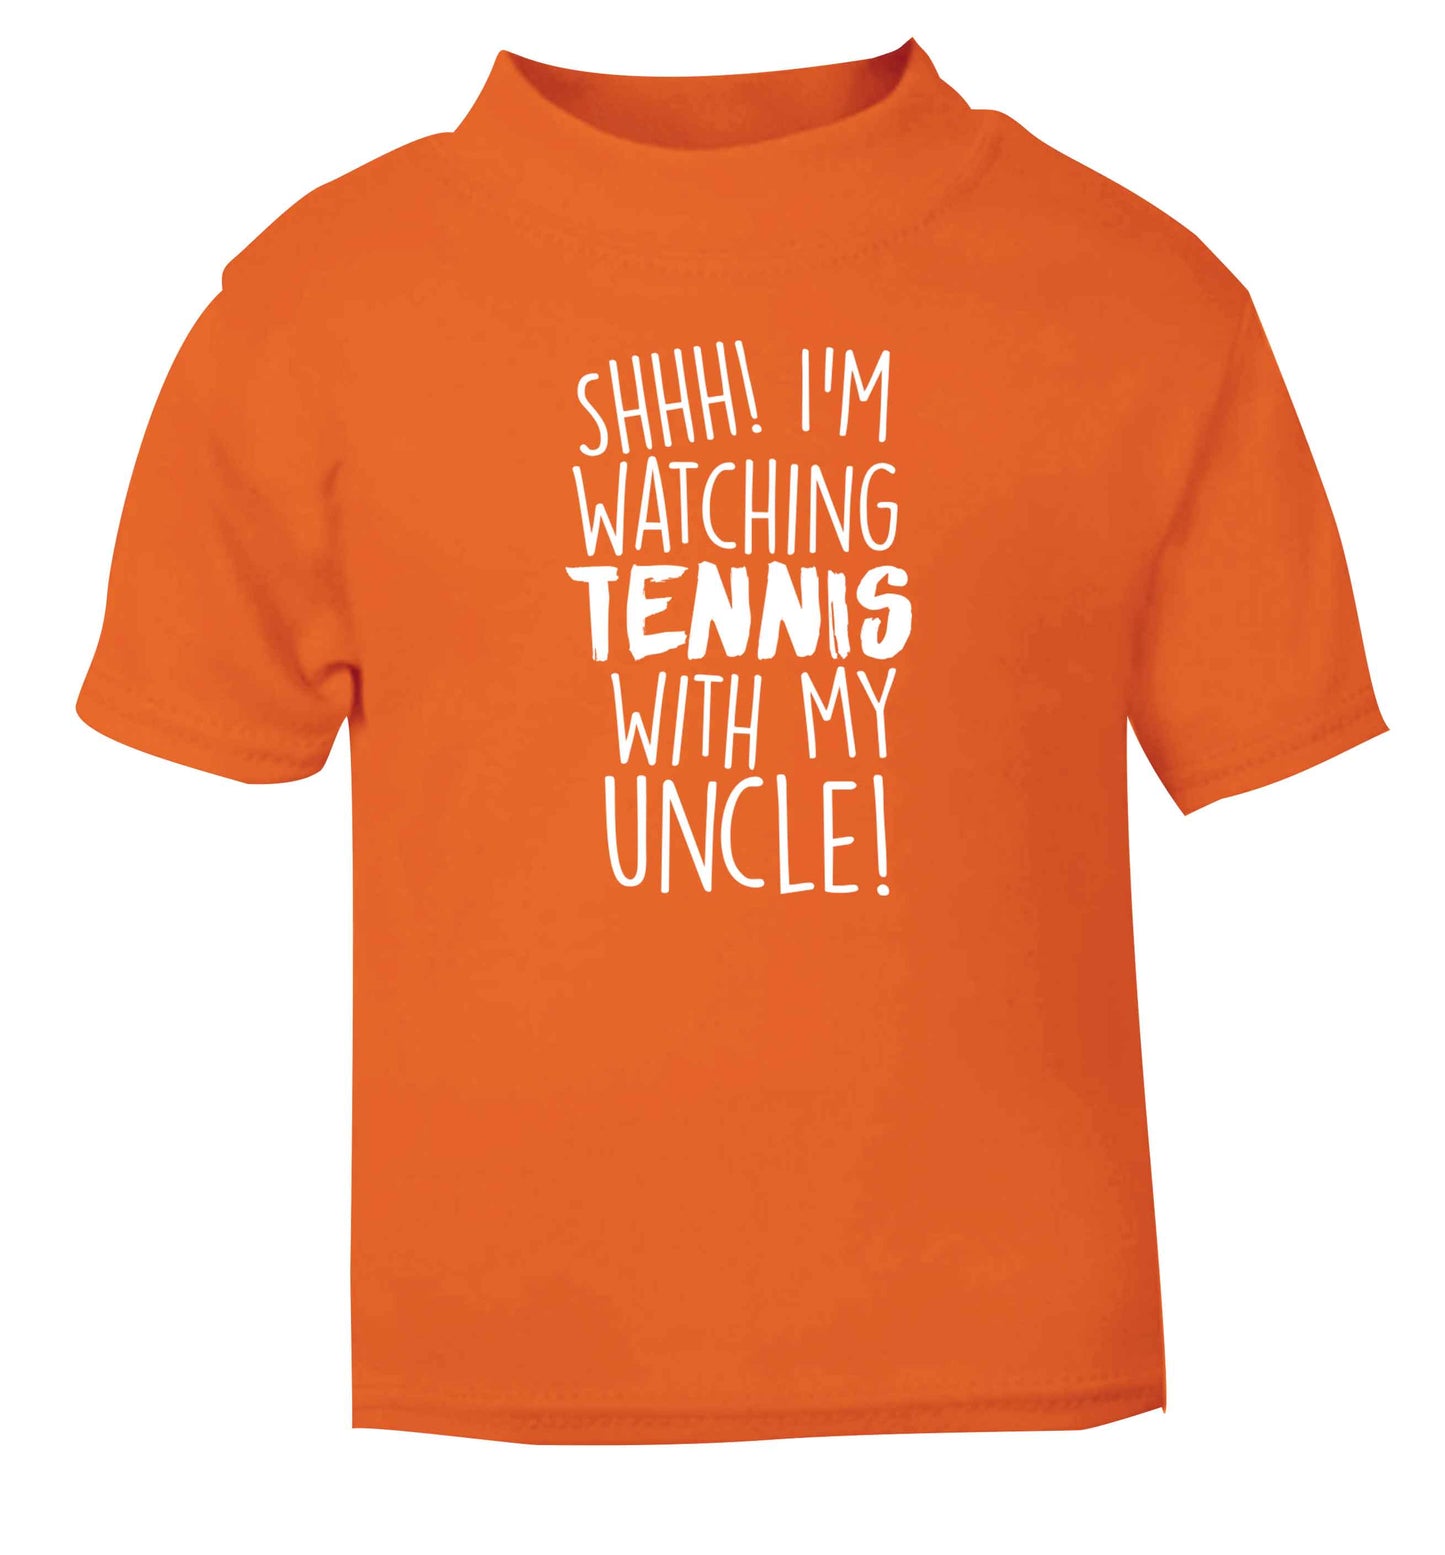 Shh! I'm watching tennis with my uncle! orange Baby Toddler Tshirt 2 Years